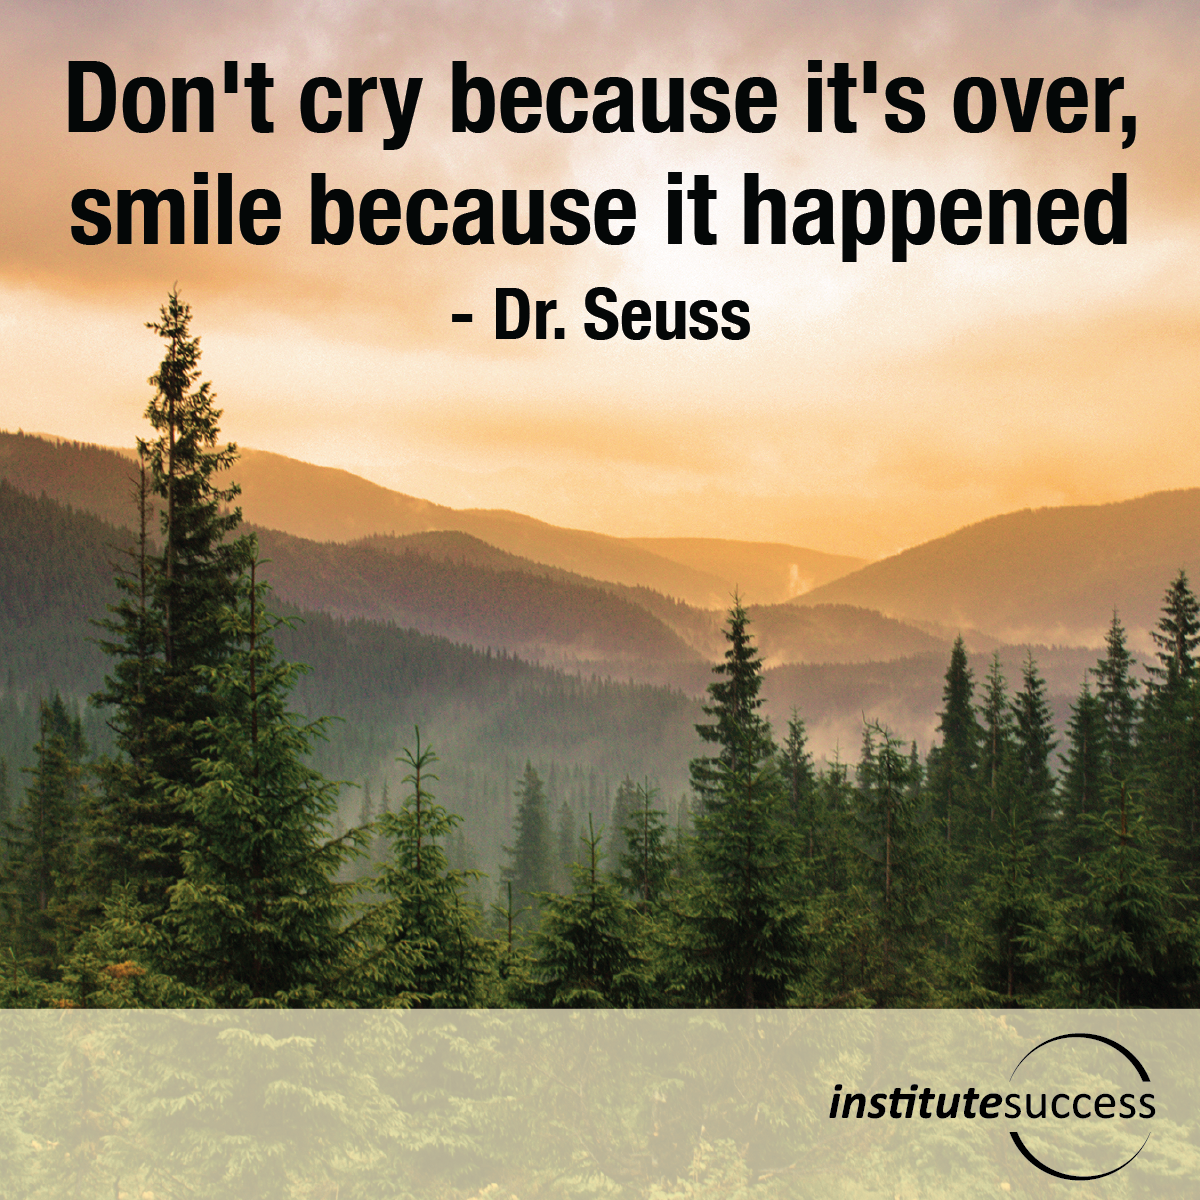 2018-04-25-quote-dont-cry-because-its-ov